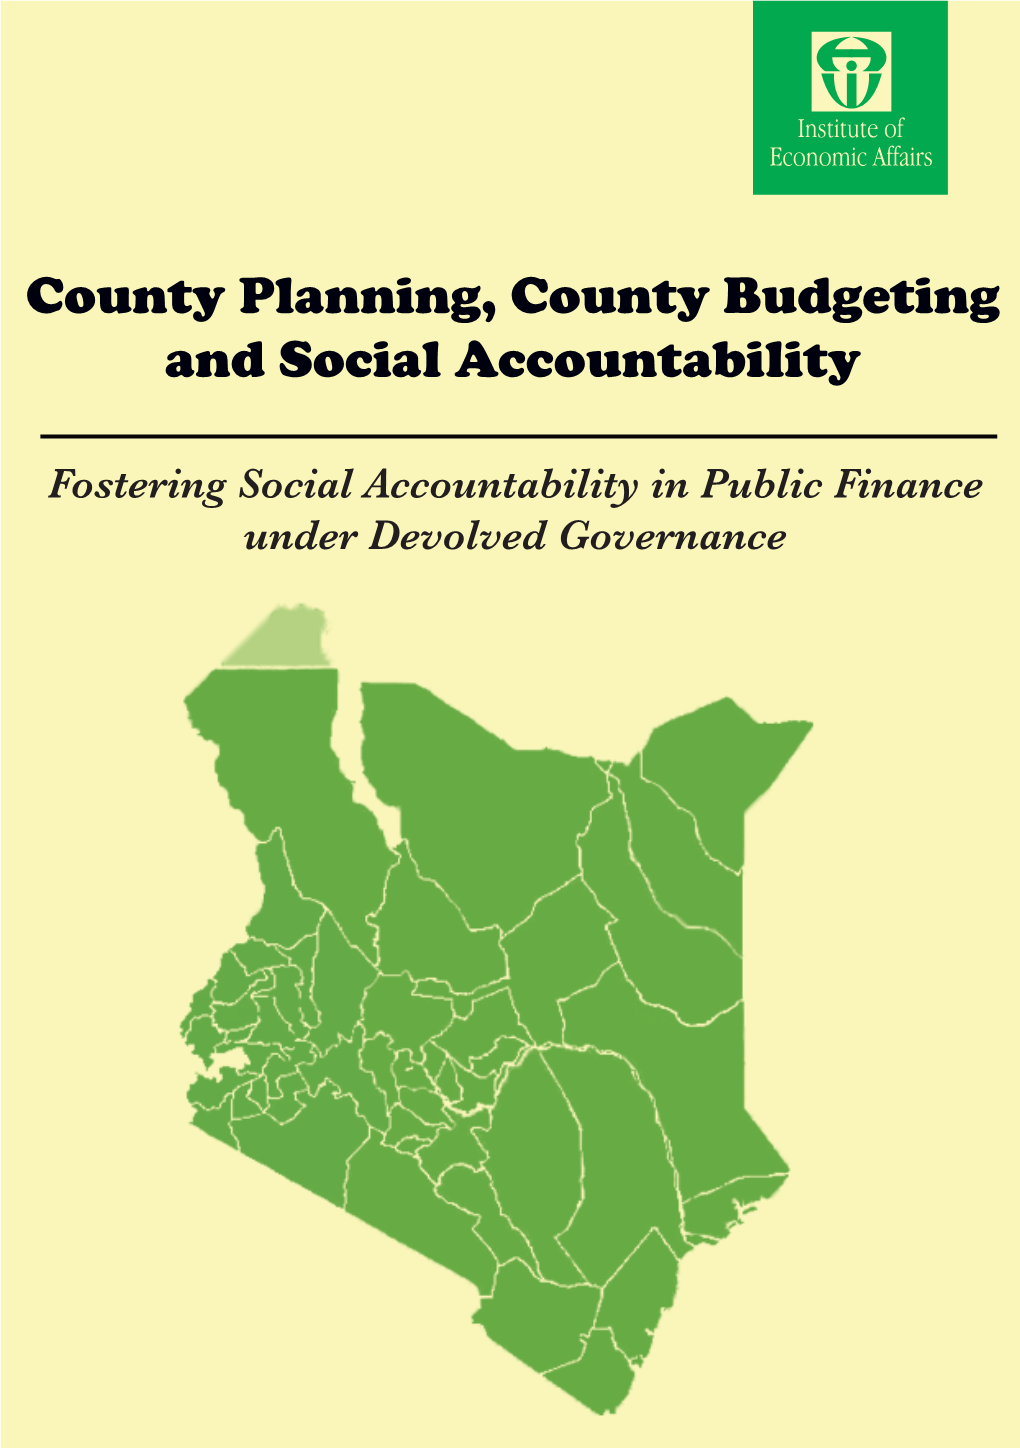 County Planning, County Budgeting and Social Accountability